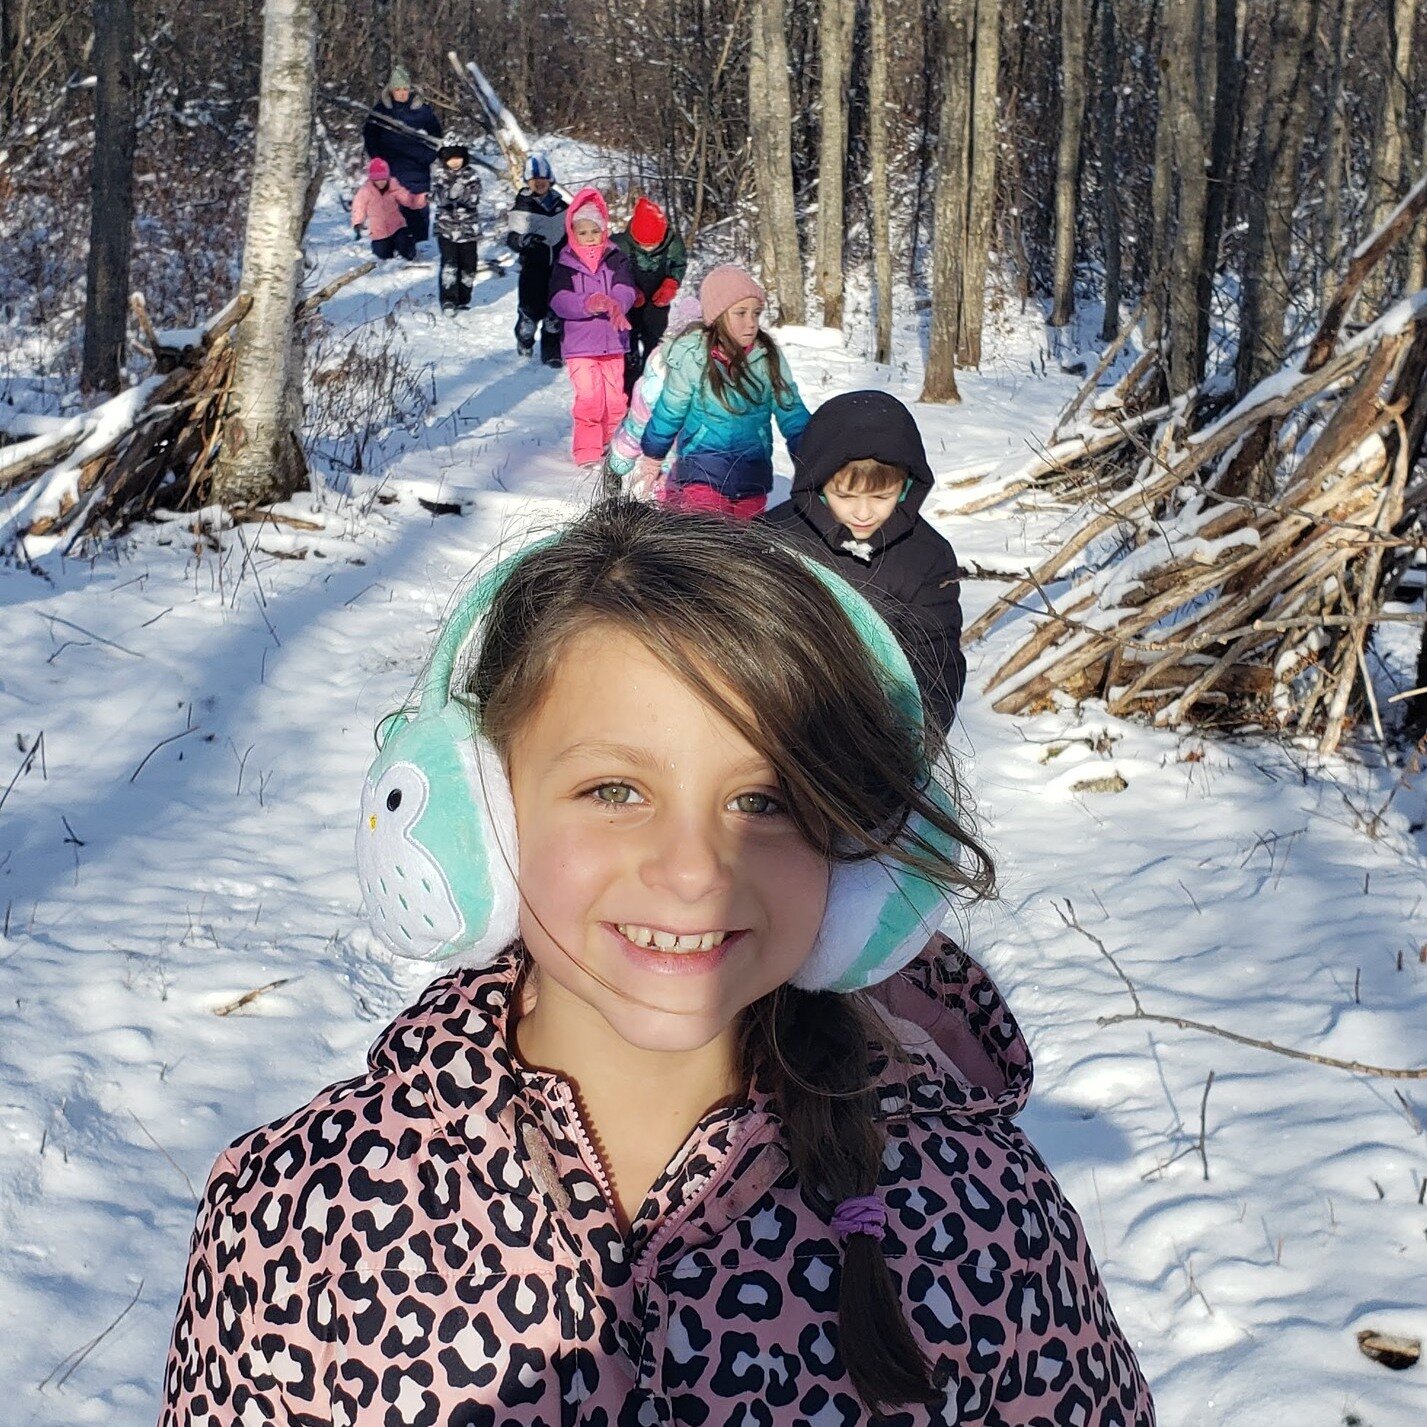 Are you a winter hiker? What are your favorite trails to enjoy this time of year?

Photo: Jonesport Elementary School students looking for signs of active winter animals during outdoor school